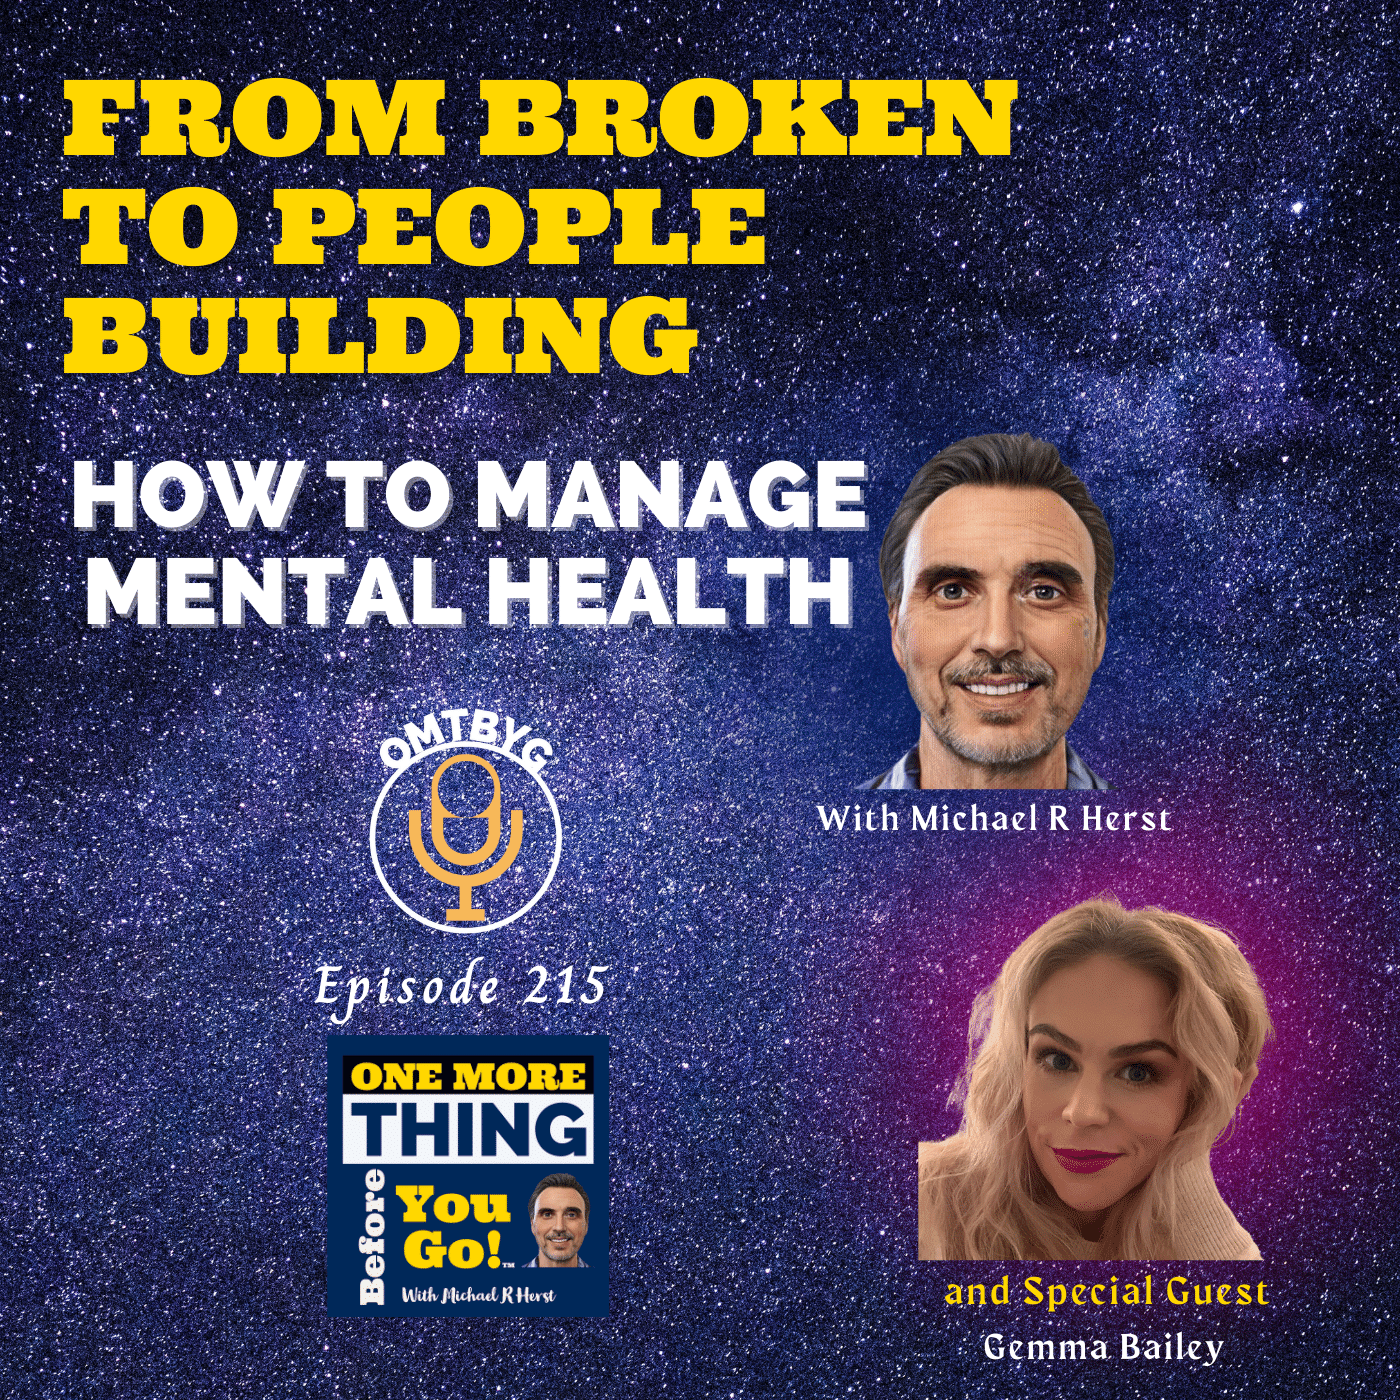 From Broken to People Building: How to Manage Mental Health